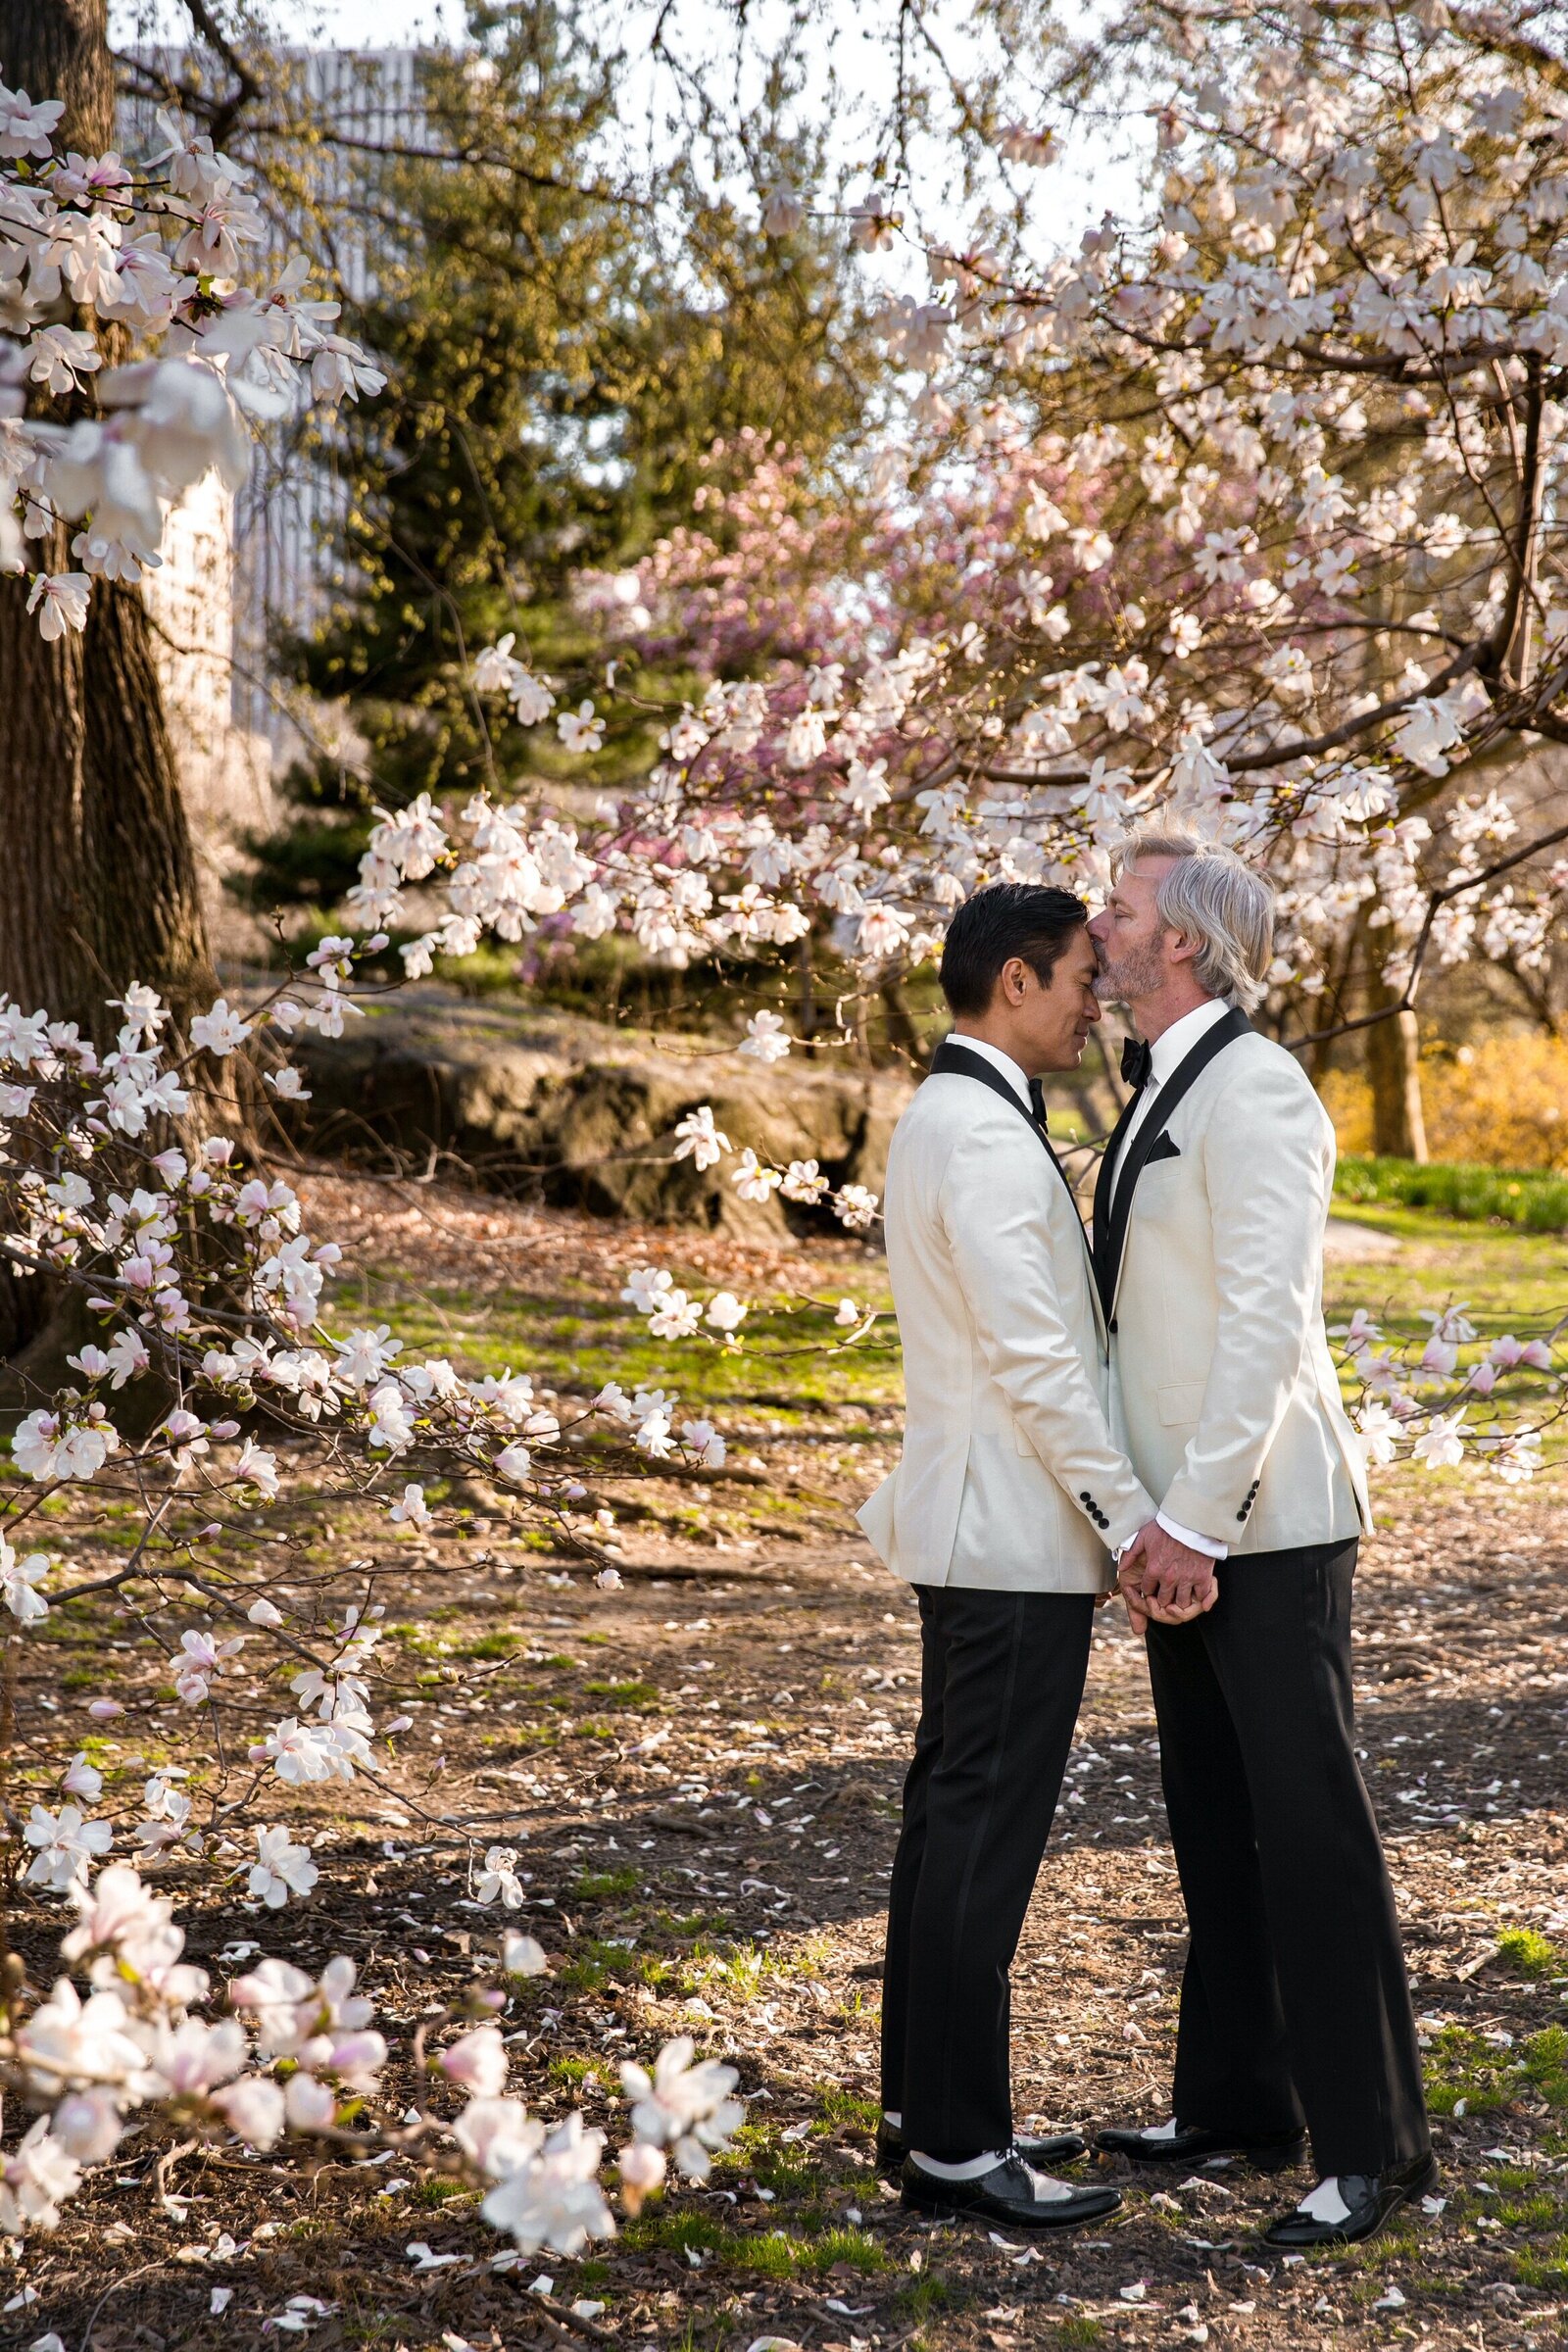 Two grooms holding hands while one kisses the other's forehead.